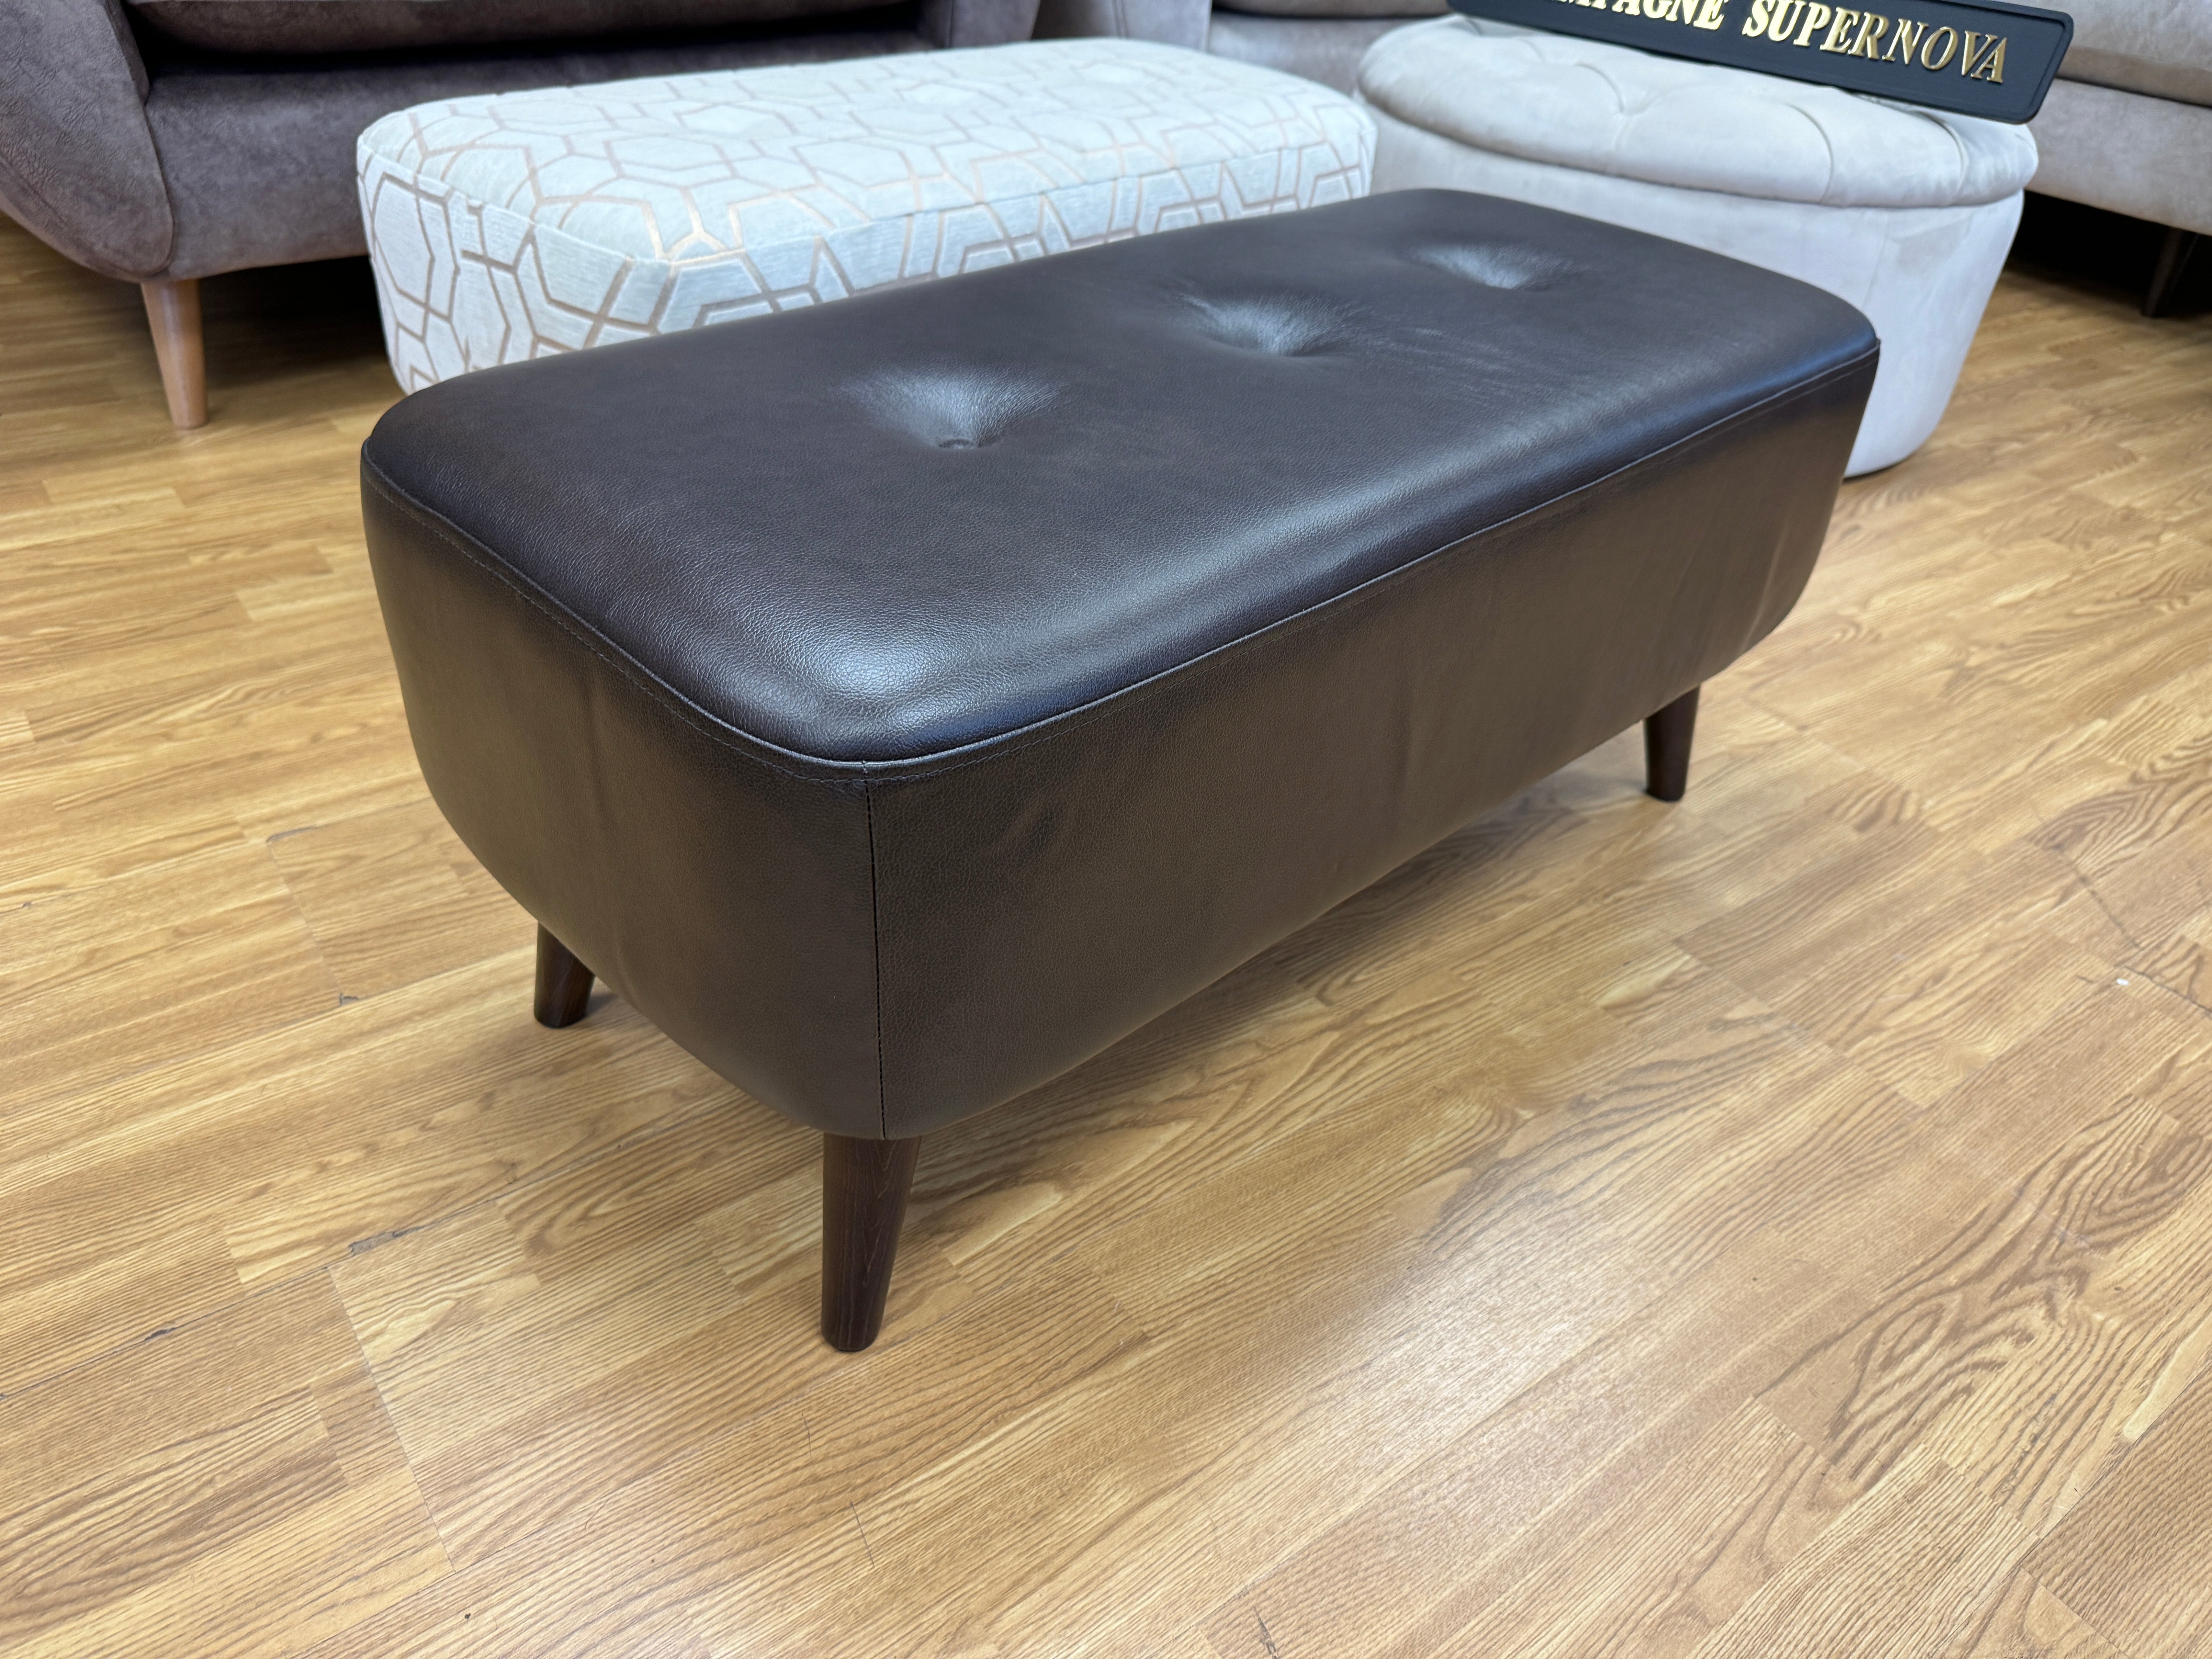 WHITE LABEL LISBON small bench footstool in dark brown leather